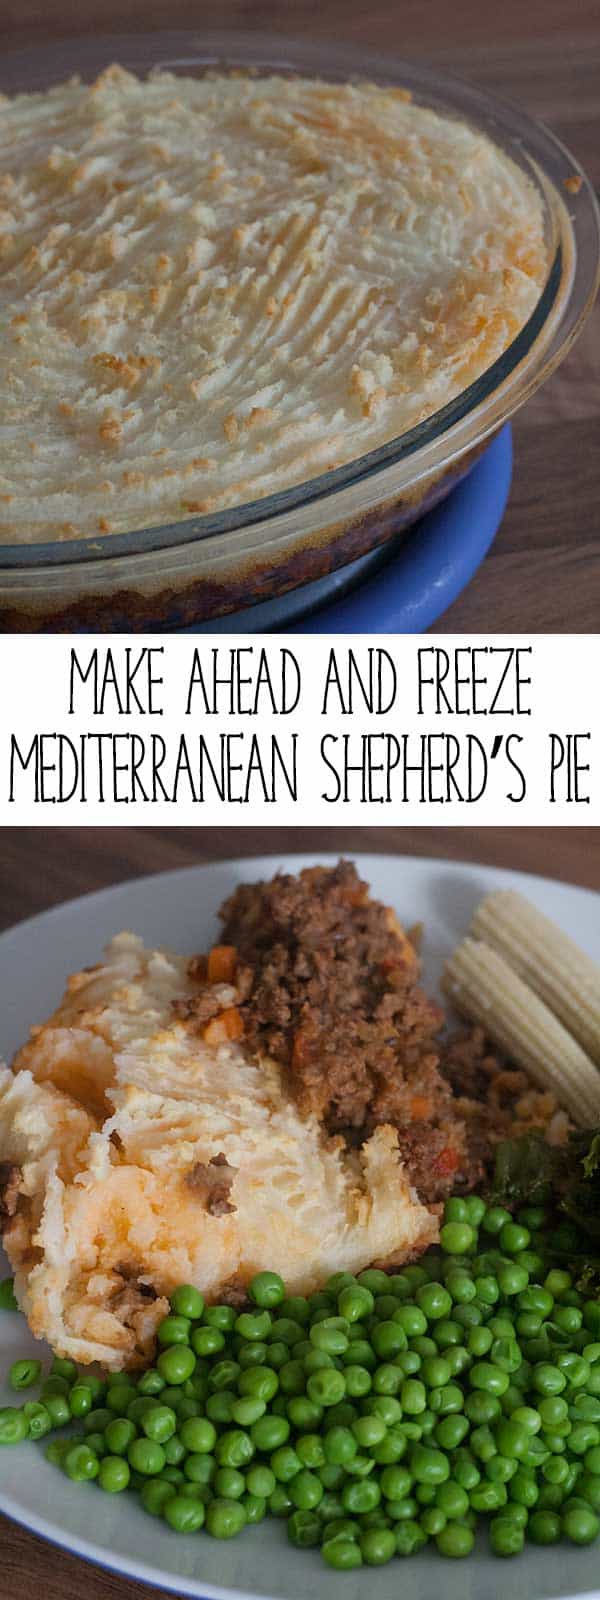 A Delicious make-ahead recipe that can be frozen for Mediterranean Shepherd's Pie perfect to make in batch and use for easy mid-week family meals.